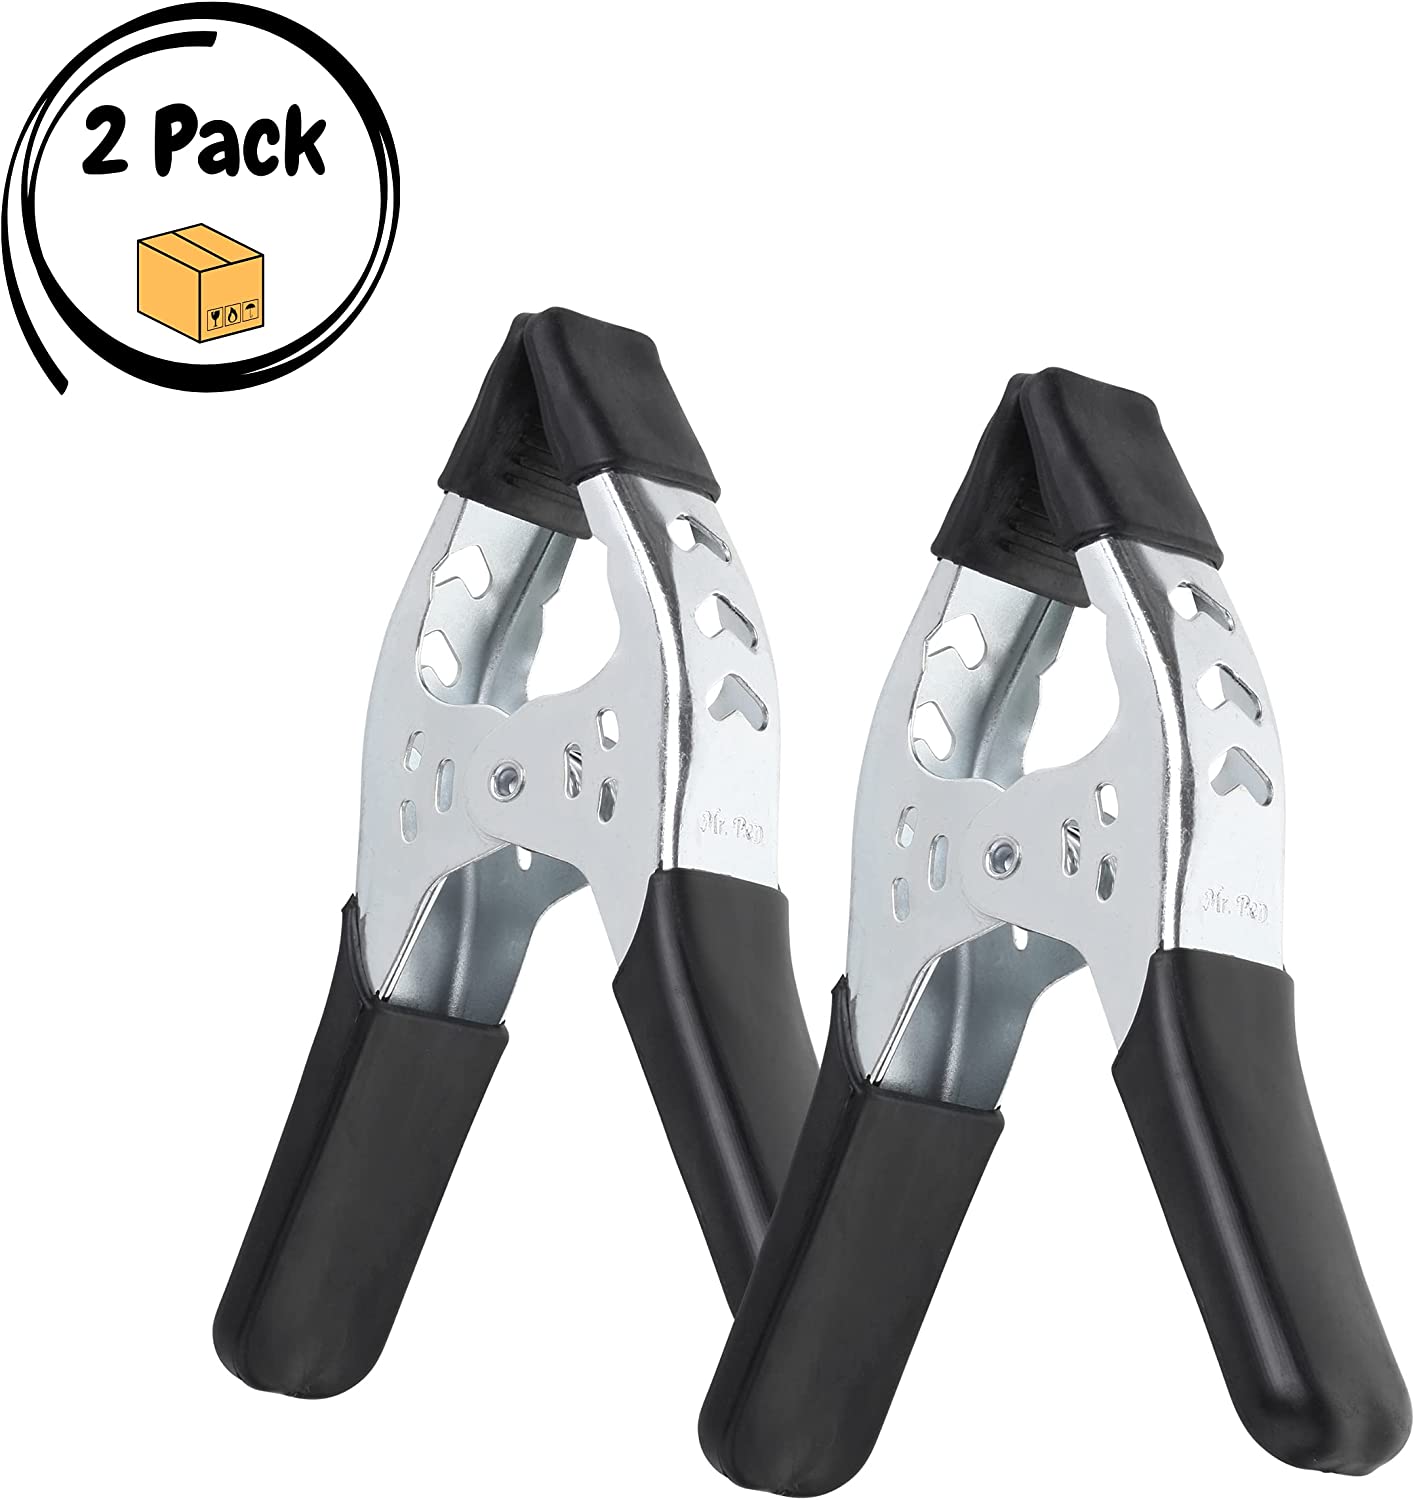 Mr. Pen- Spring Clamps, 2 Pack, 6 Inches - Mr. Pen Store